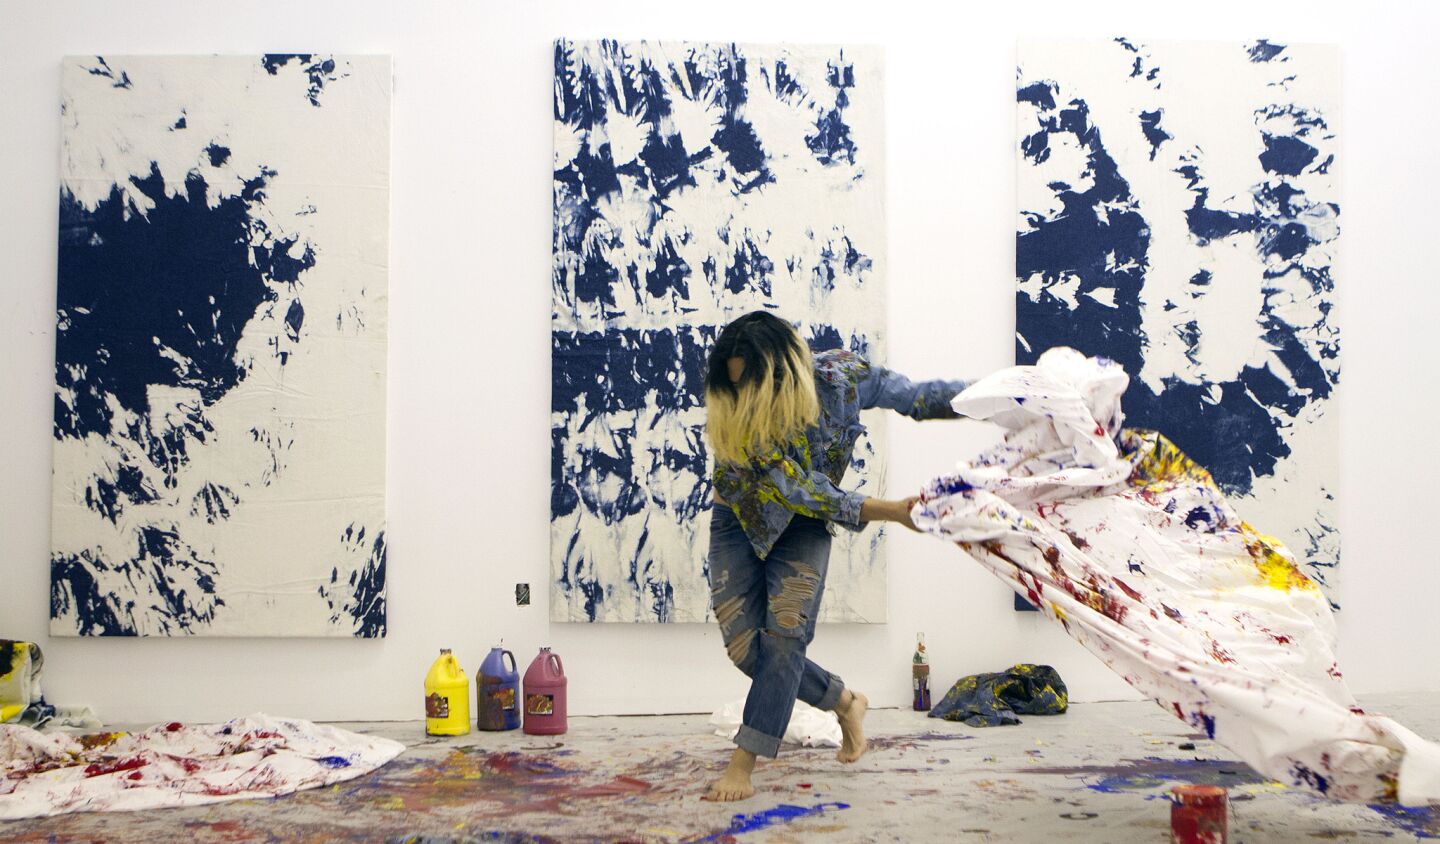 Bangkok, Thailand-raised, New York-based artist Korakrit Arunanondchai works on his exhibition at the Mistake Room, a nonprofit exhibition space in downtown Los Angeles.